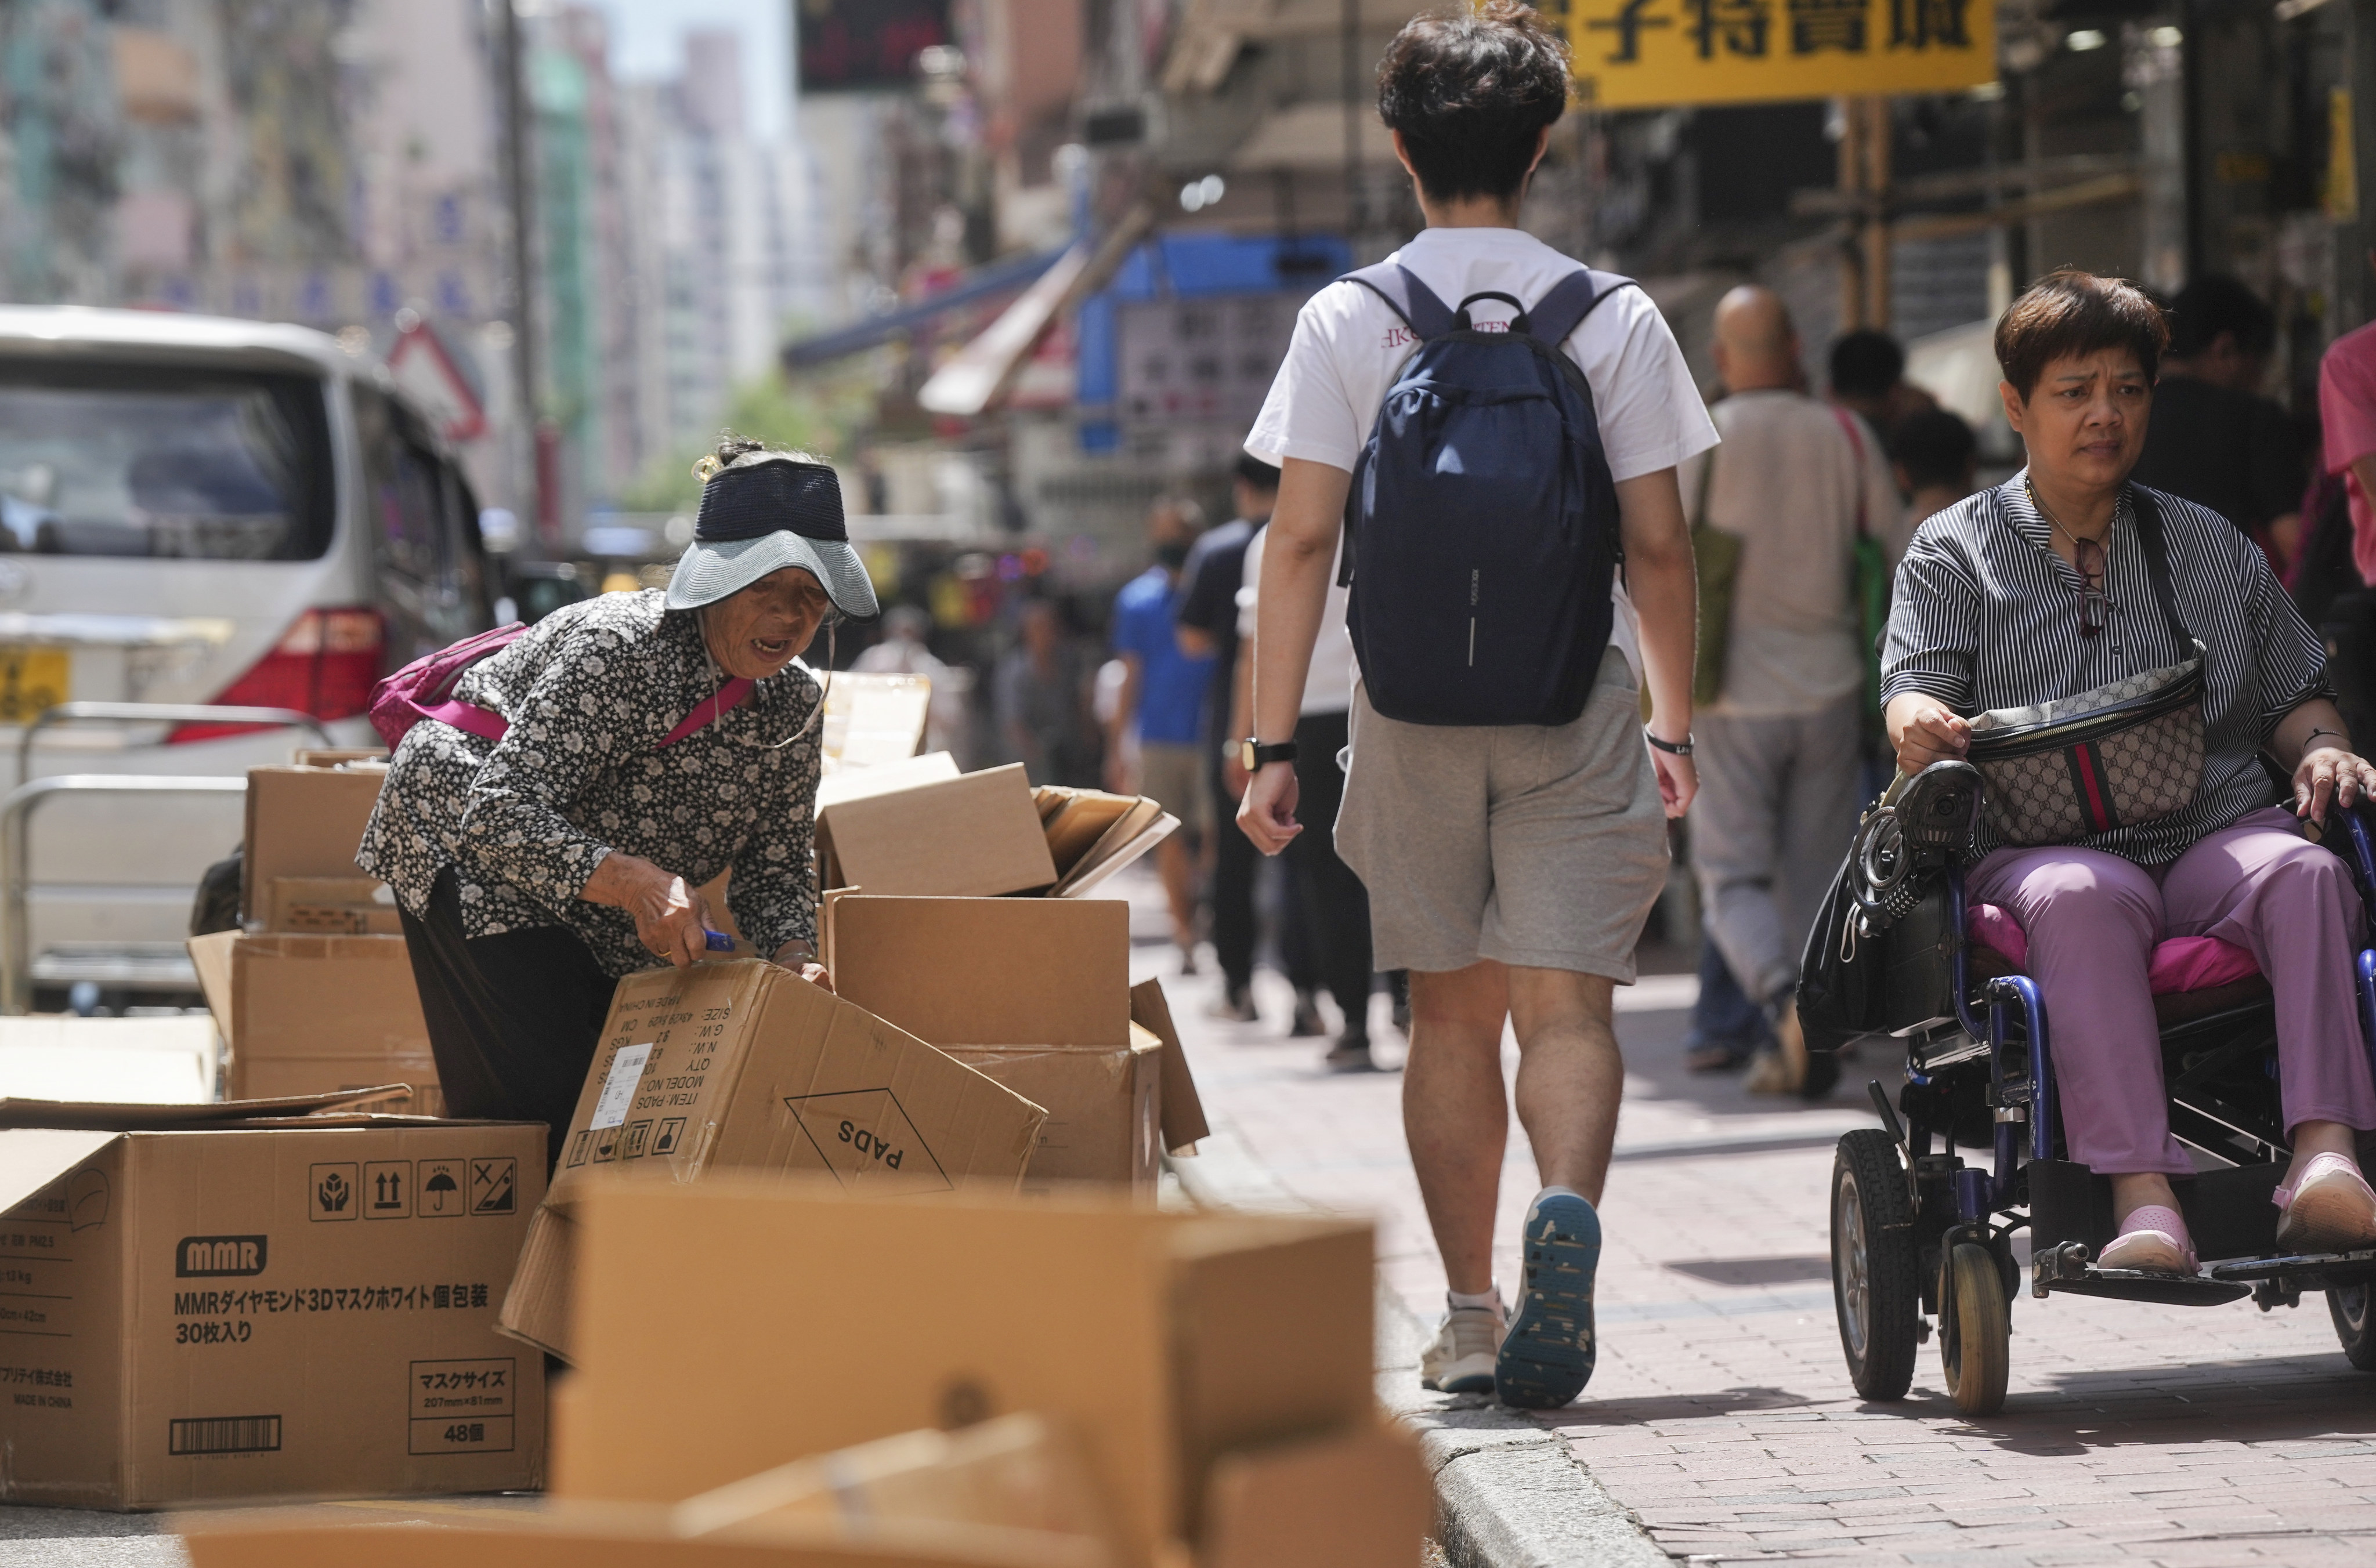 An elderly woman sorts out abandoned cardboard boxes for resale in Sham Shui Po. The city’s poverty rate in 2020 was 23.6 per cent, government statistics have shown – equivalent to 1.65 million people. Photo: Elson LI